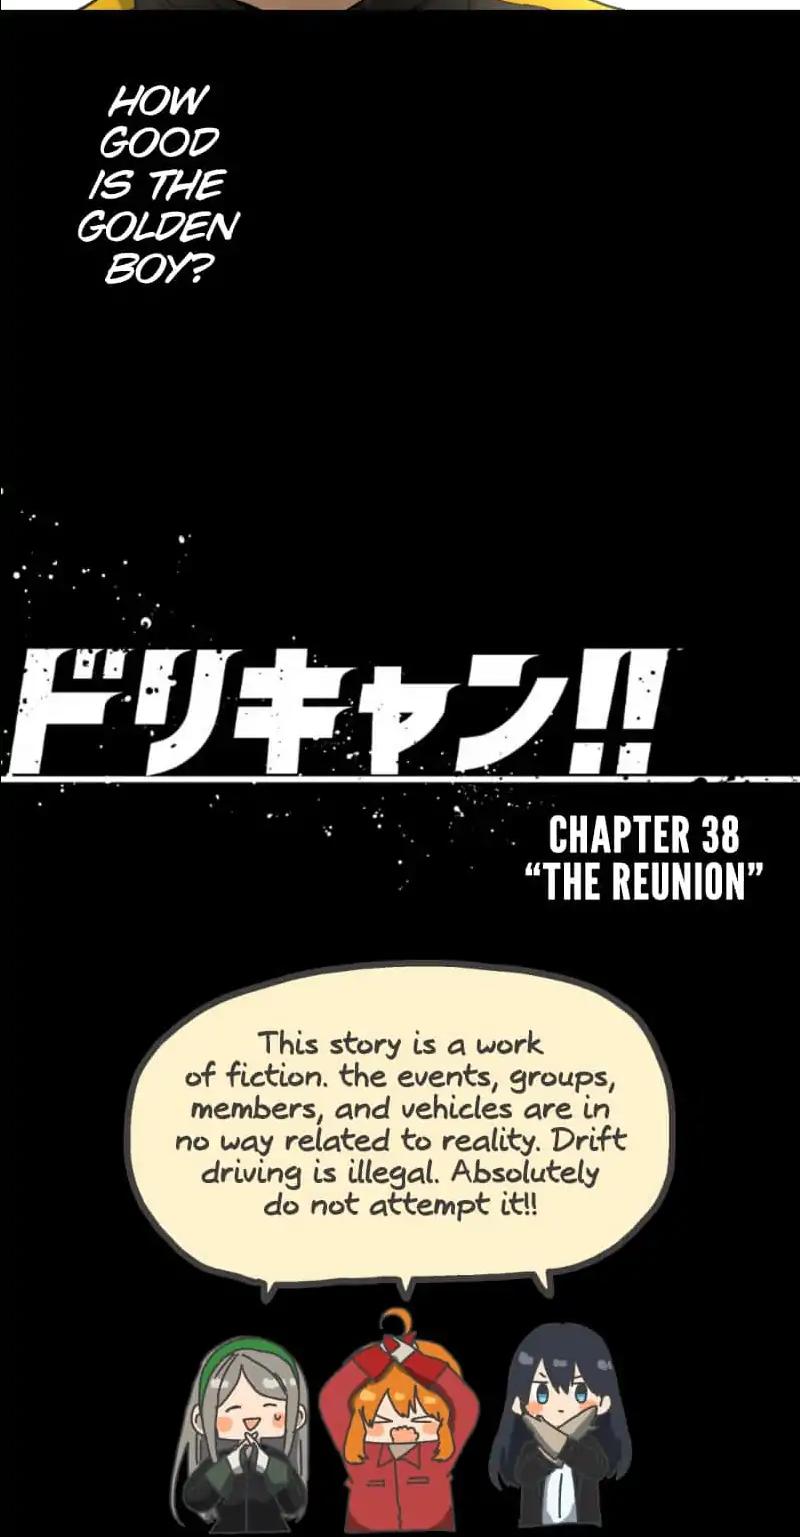 Dricam!! Chapter 38: The Reunion